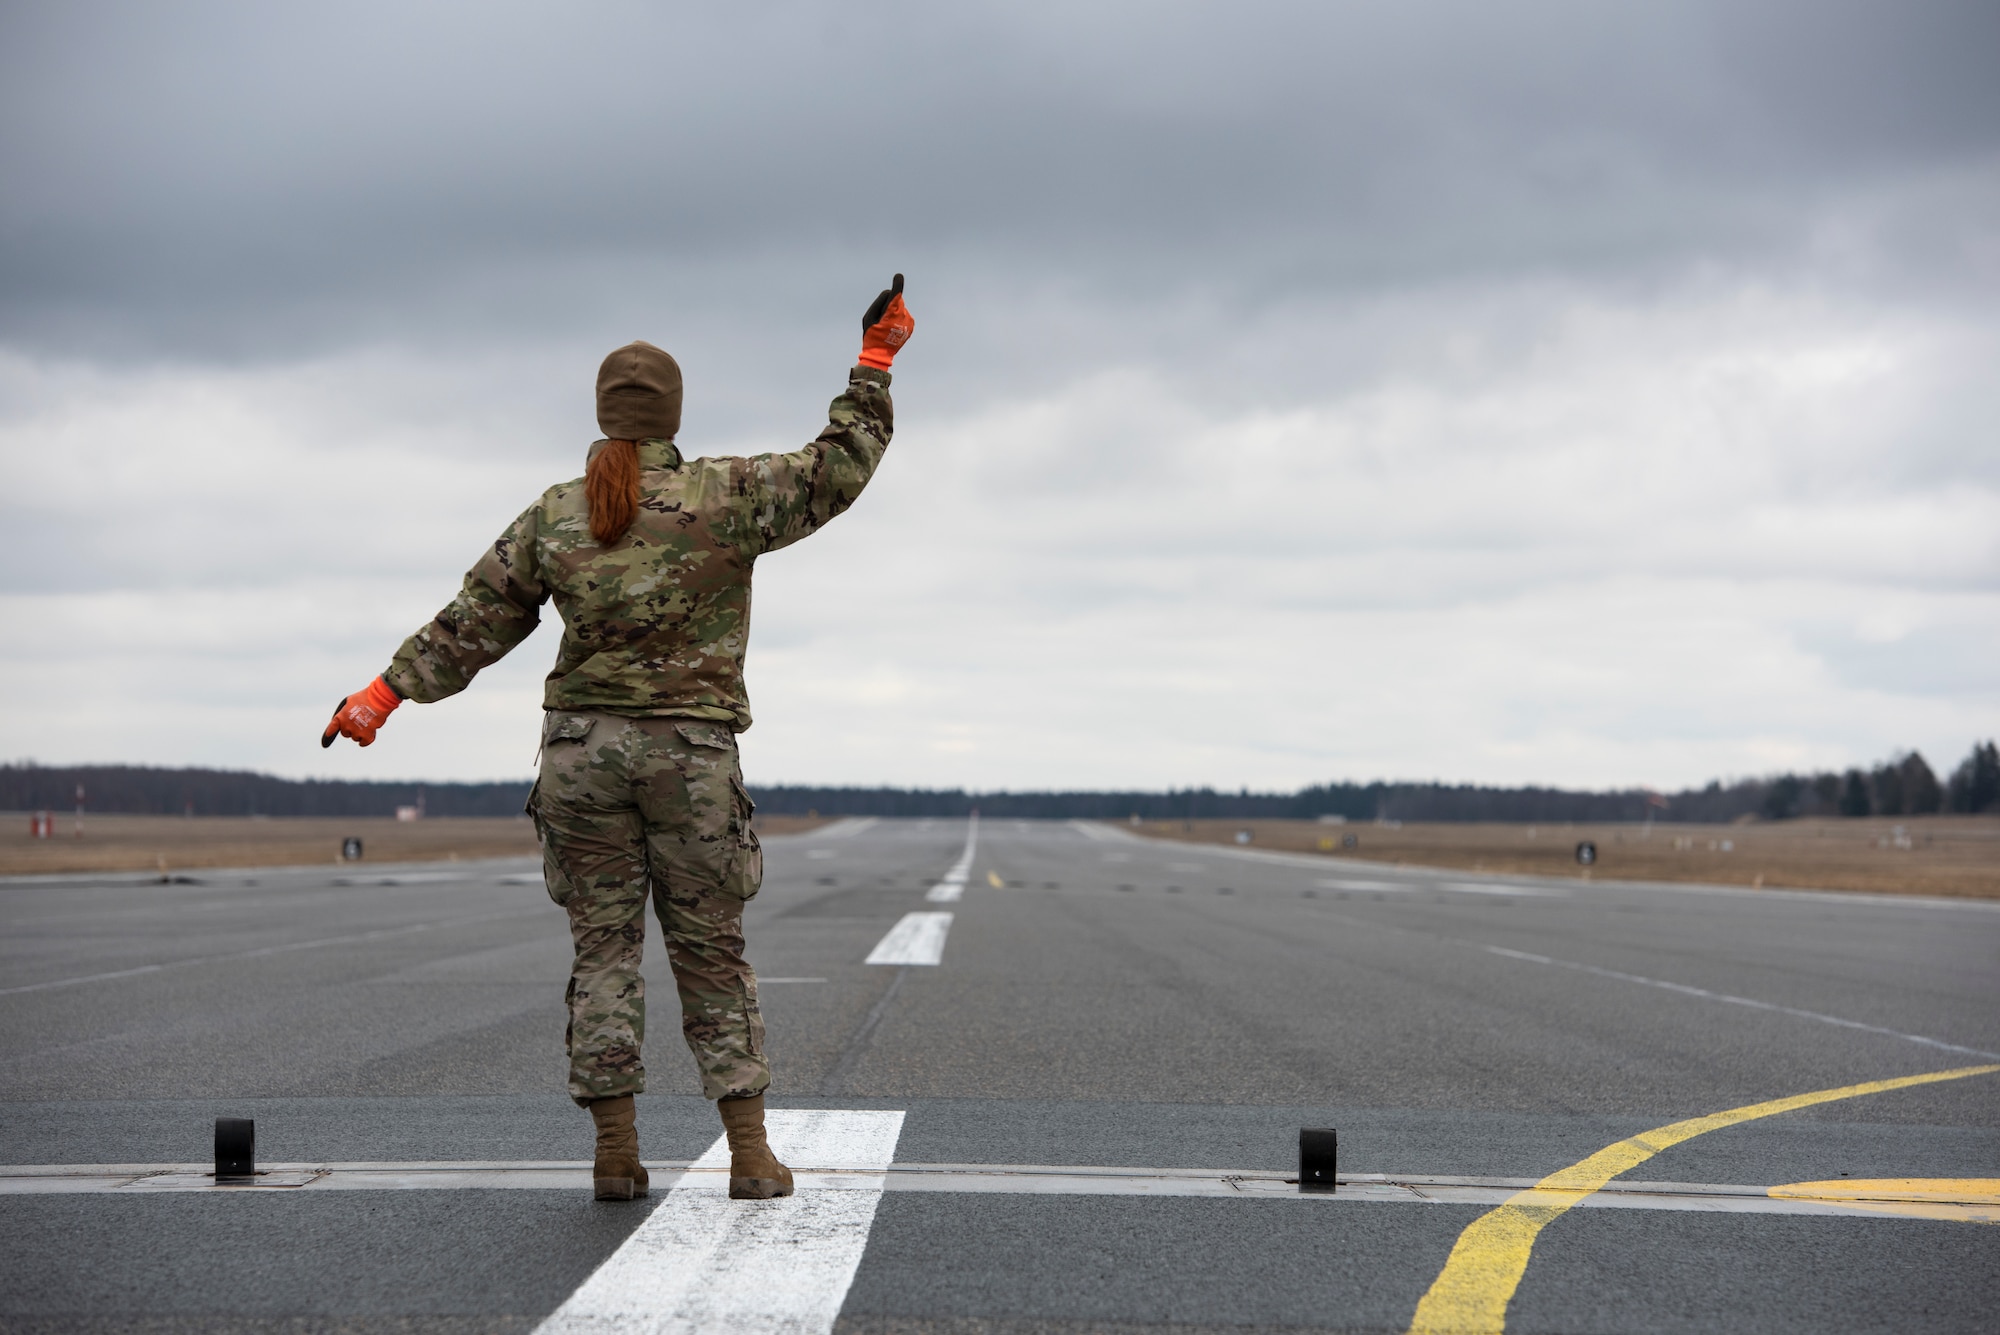 U.S. Air Force Airman 1st Class Chelsea Glasscock, 435th Construction and Training Squadron Aircraft Arresting System Depot apprentice, gives the signal to reel in the cable system during a Barrier Arresting Kit certification at Ämari Air Base, Estonia, March 17, 2021. The BAK is certified annually to test the stability and effectiveness of the system, which acts as a braking mechanism to stop the aircraft in the event of an emergency that would prevent the aircraft from performing a standard landing. (U.S. Air Force photo by Airman 1st Class Jessi Monte)